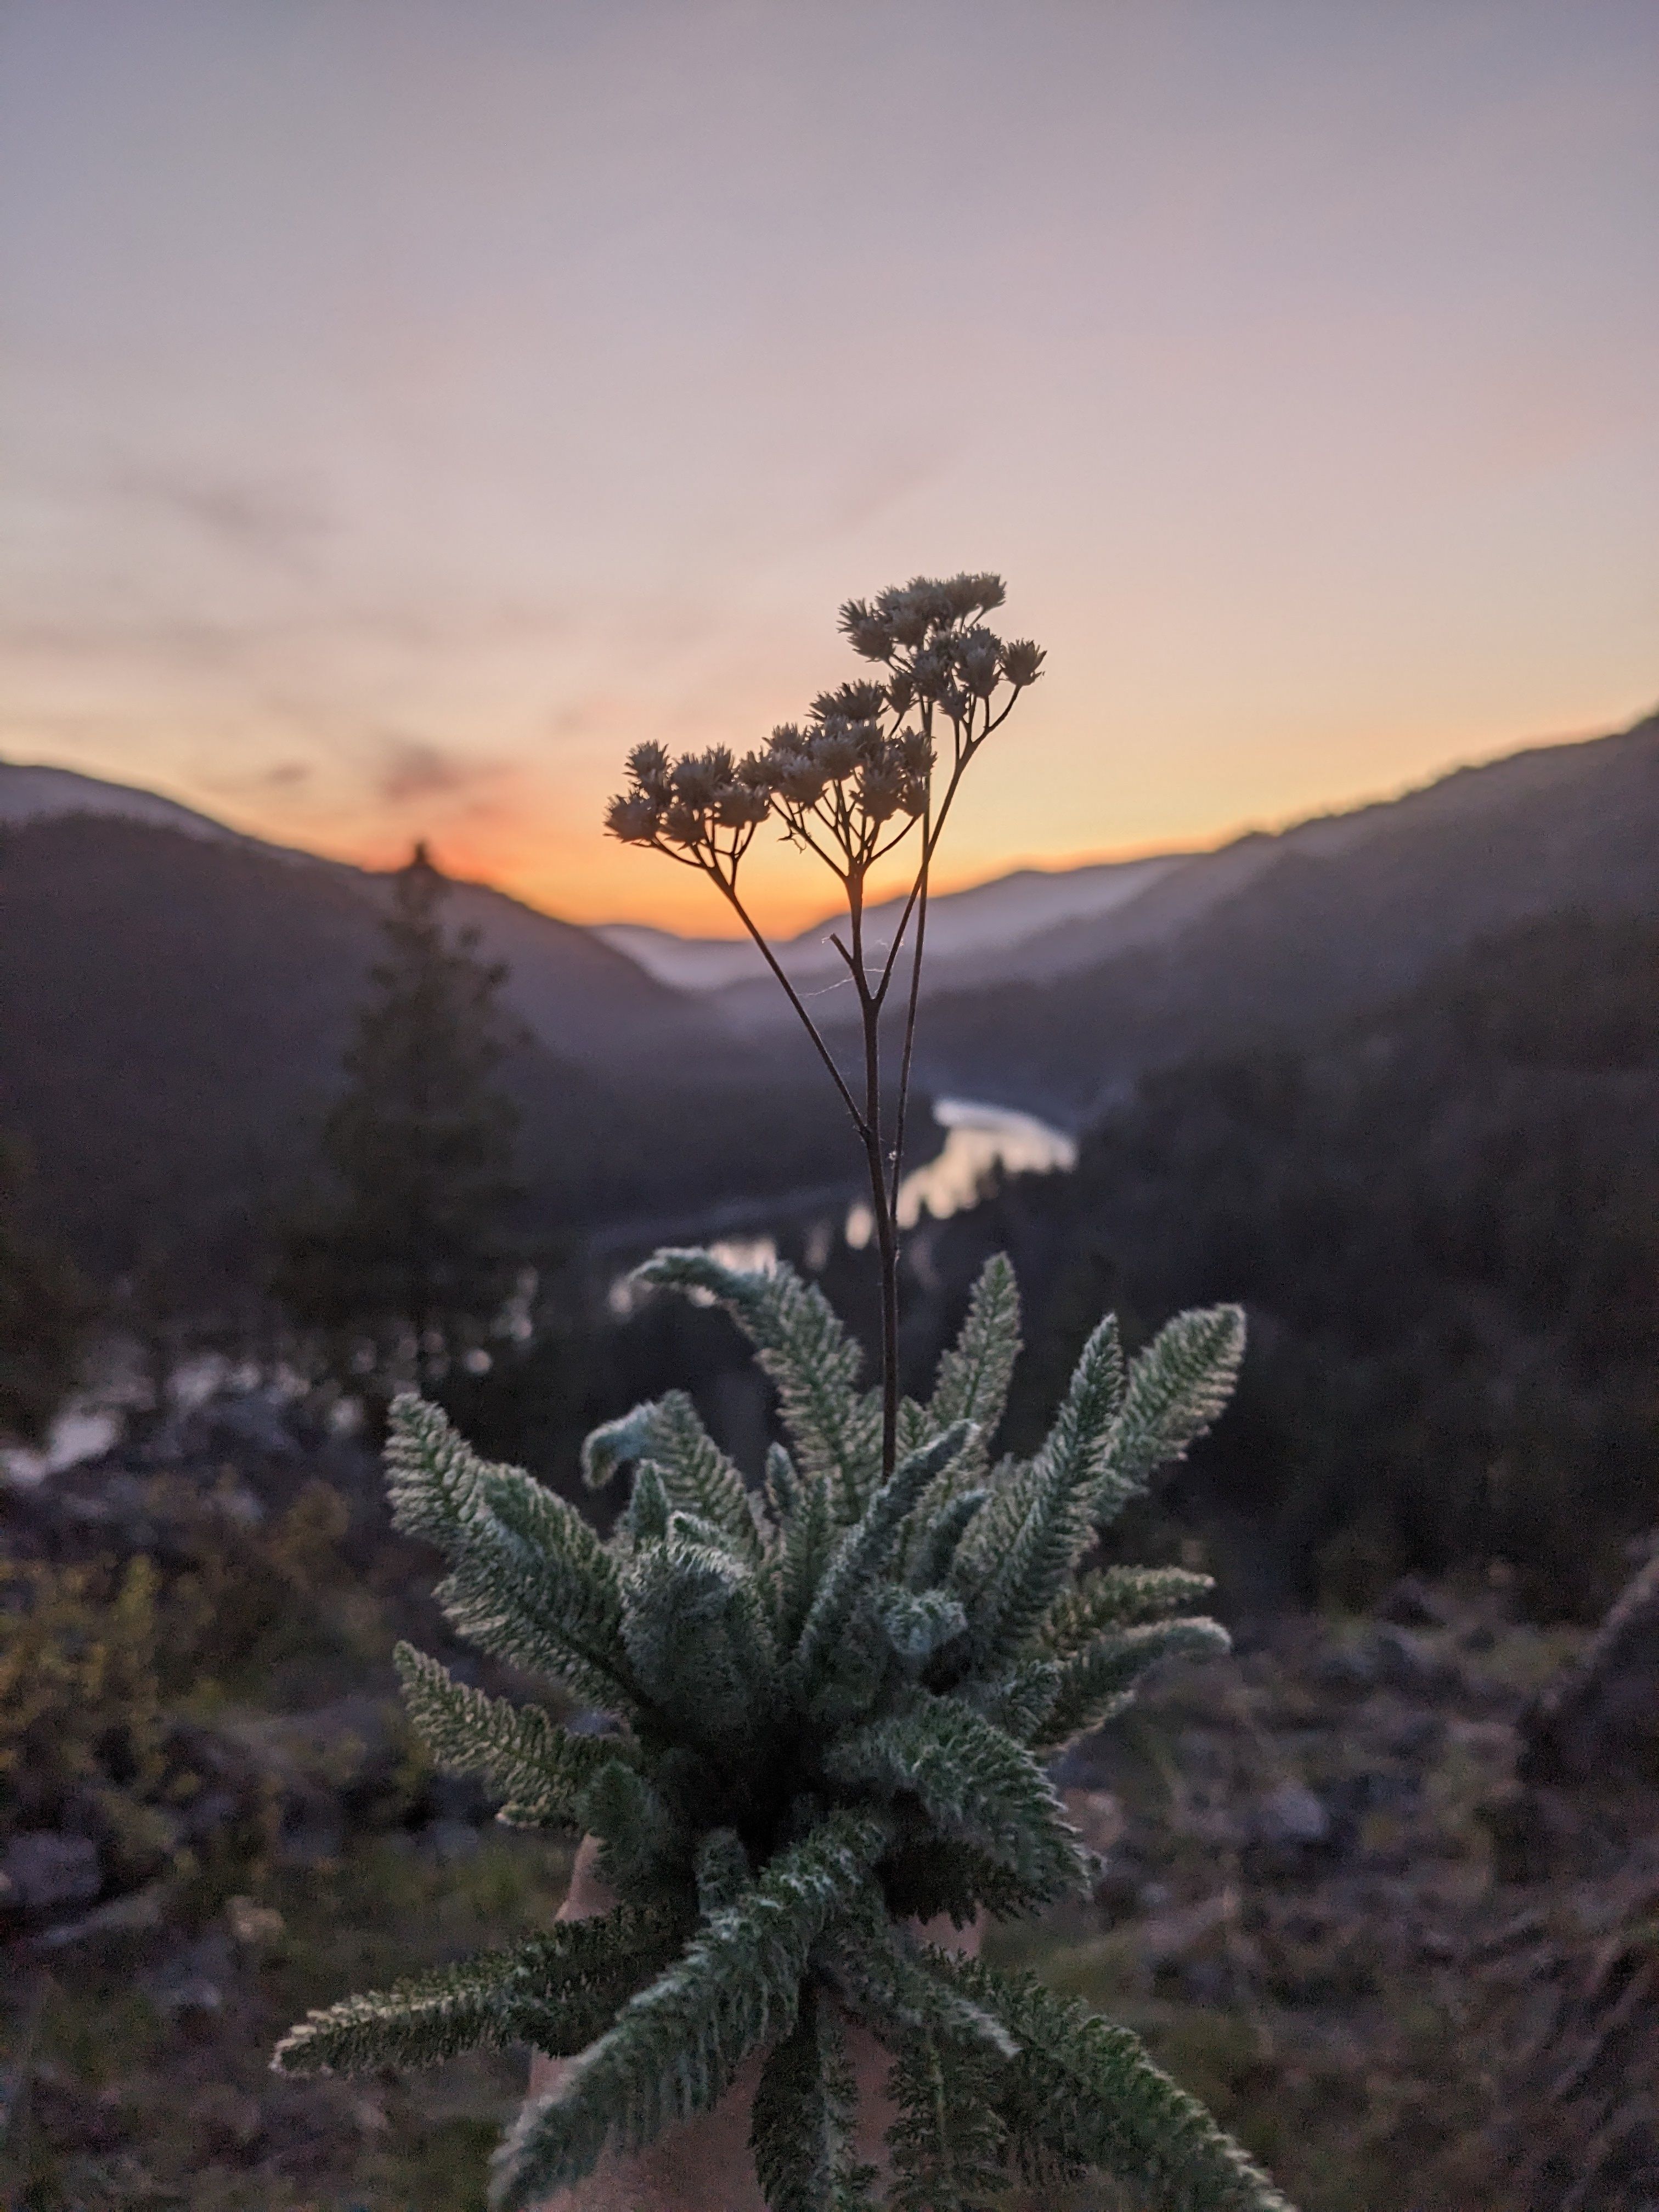 A hand holds a blooming plant in front of a sunset.